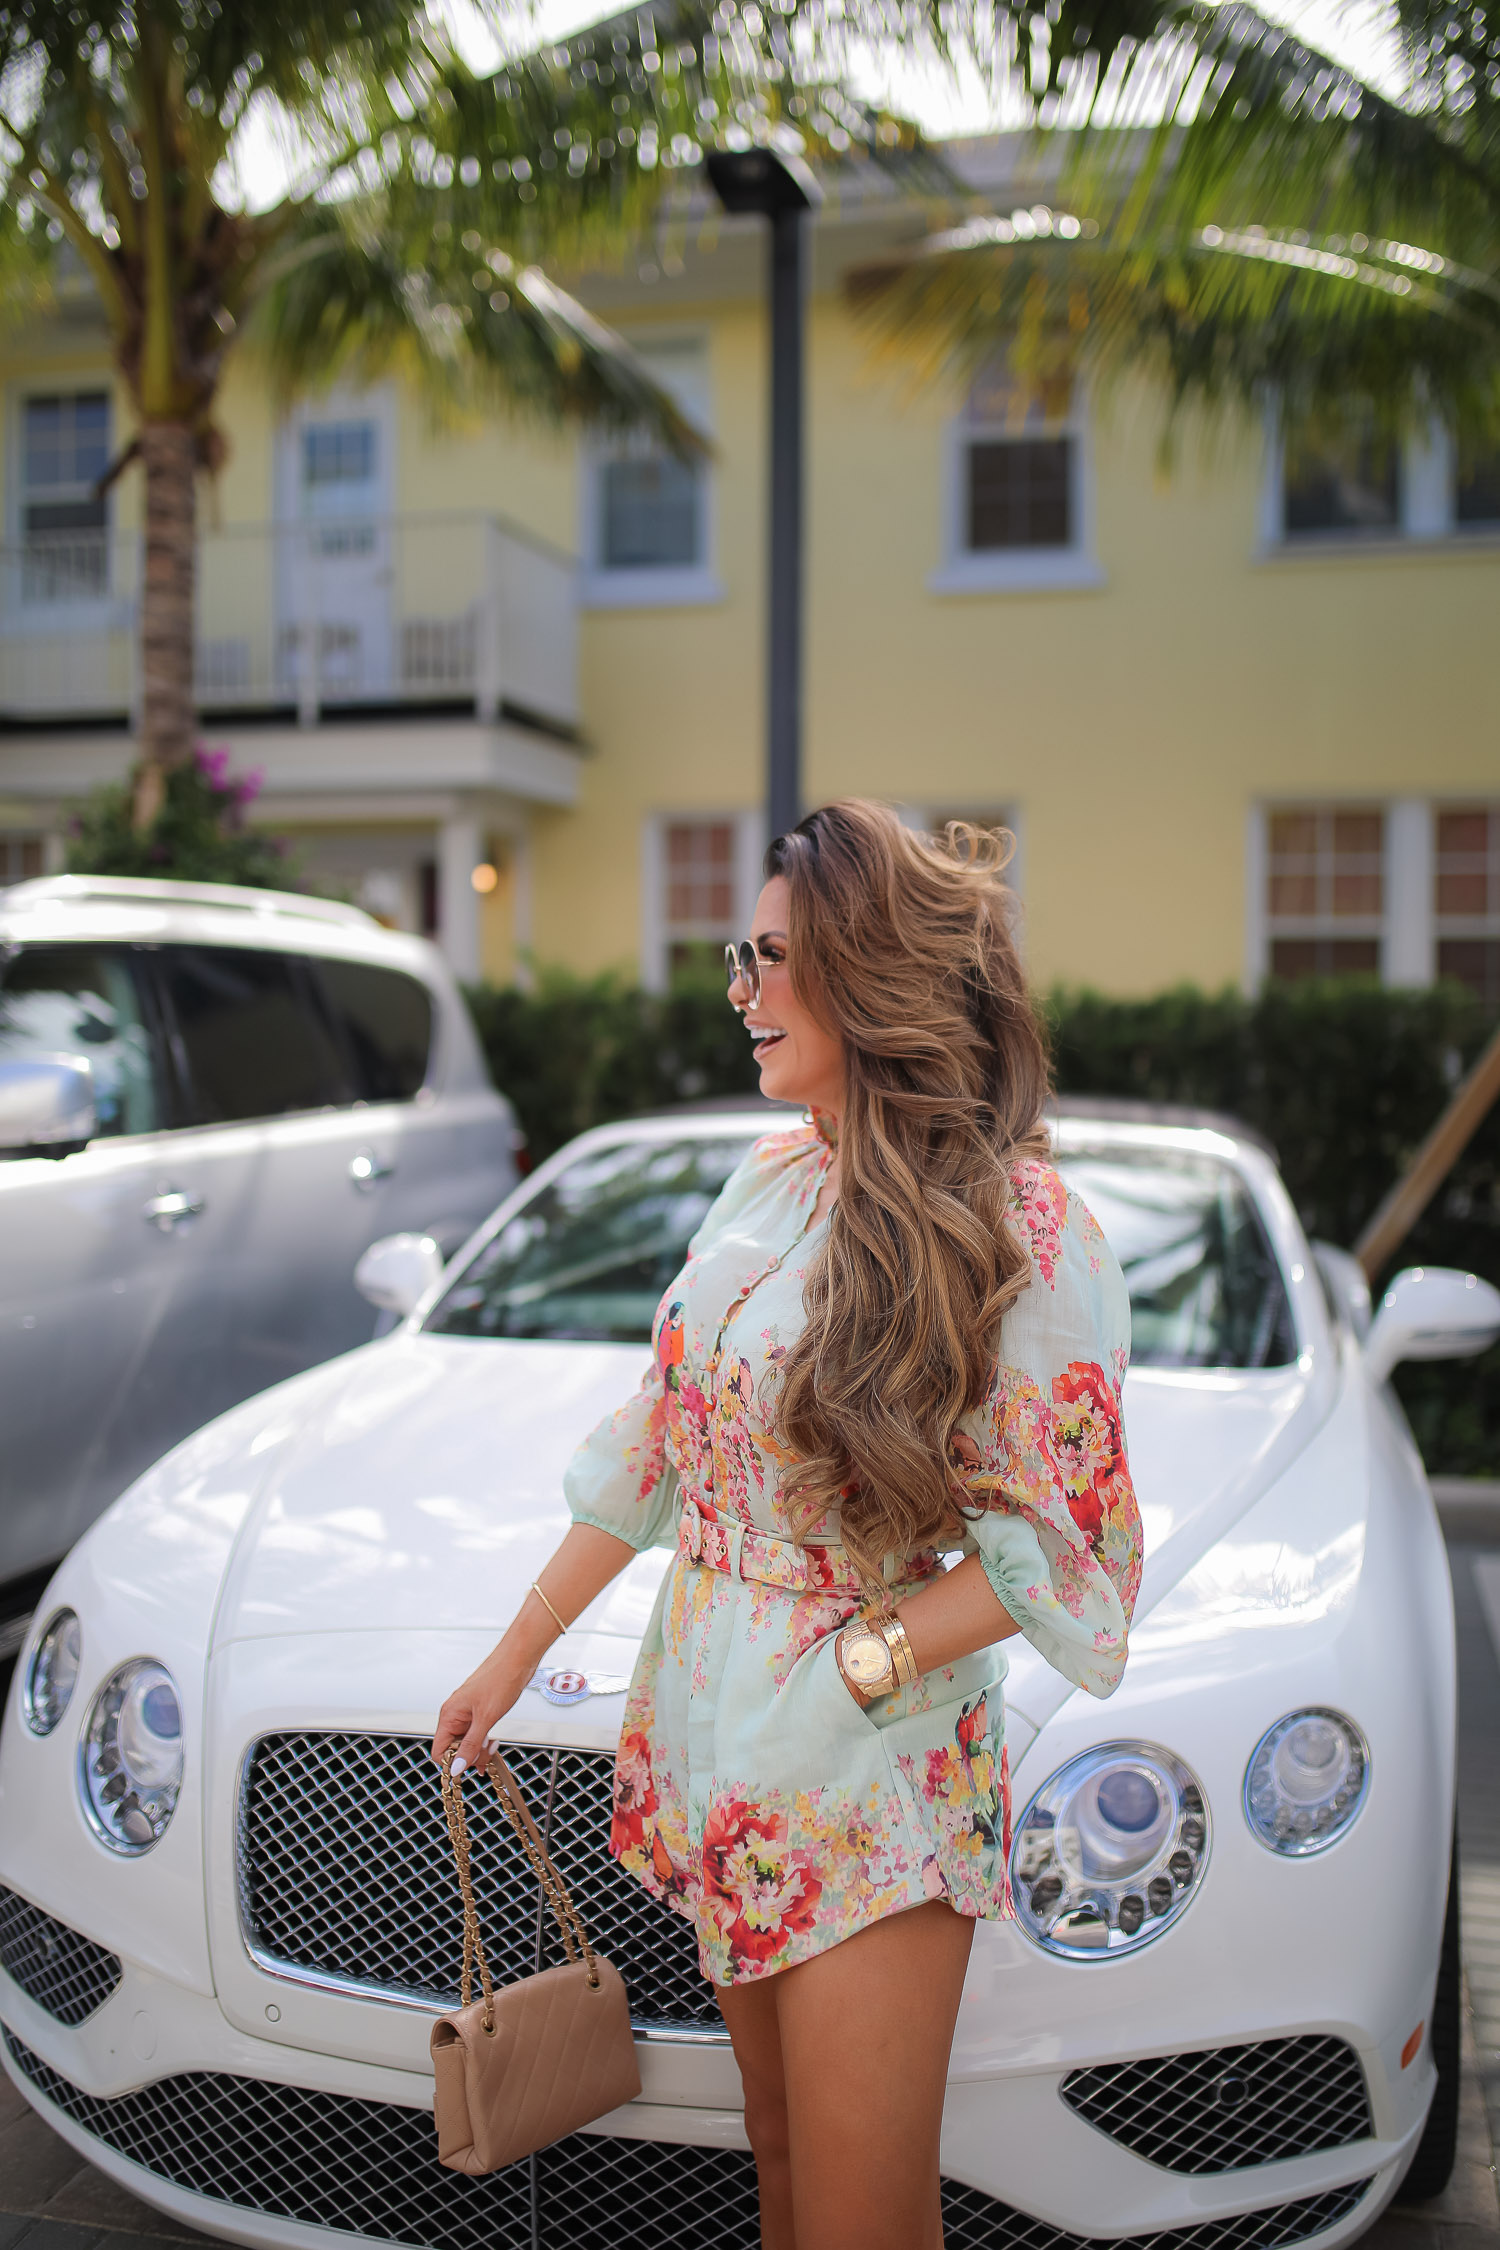 Palm beach where to stay, White elephant palm beach, Zimmerman Mae Floral Shorts and Blouse, Tiktok viral jewelry anklet, Amazon Tiktok Viral anklet, Chanel Large Button Paris Gold earrings, high end fashion blog, Emily gemma, the sweetest thing blog, luxury travel blog, palm beach white elephant | Zimmermann Outfit by popular US fashion blog, The Sweetest Thing: image of Emily Gemma standing by a white Bentley and wearing a Zimmerman Mae Floral Shorts and Blouse, Tiktok viral jewelry anklet, Amazon Tiktok Viral anklet, Chanel Large Button Paris Gold earrings, Cartier bracelets, gold Rolex watch, and carrying a Chanel handbag.  